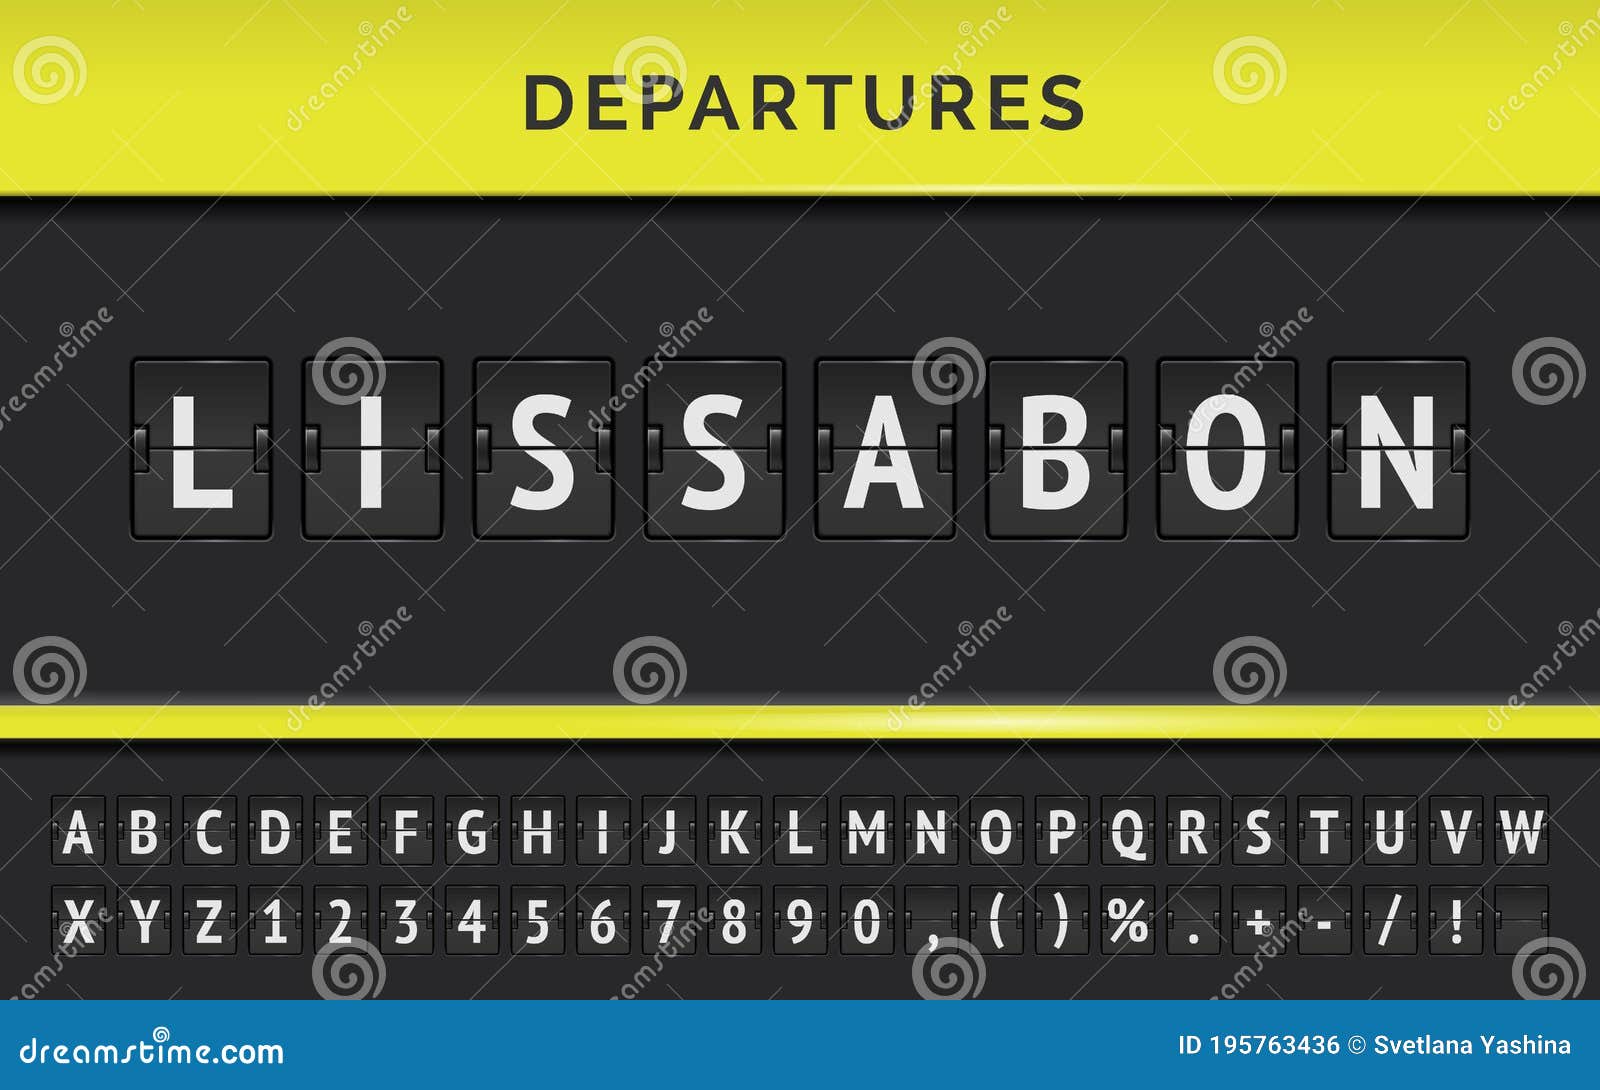  departure flip board with destination in lissabon. airport terminal panel with flight font